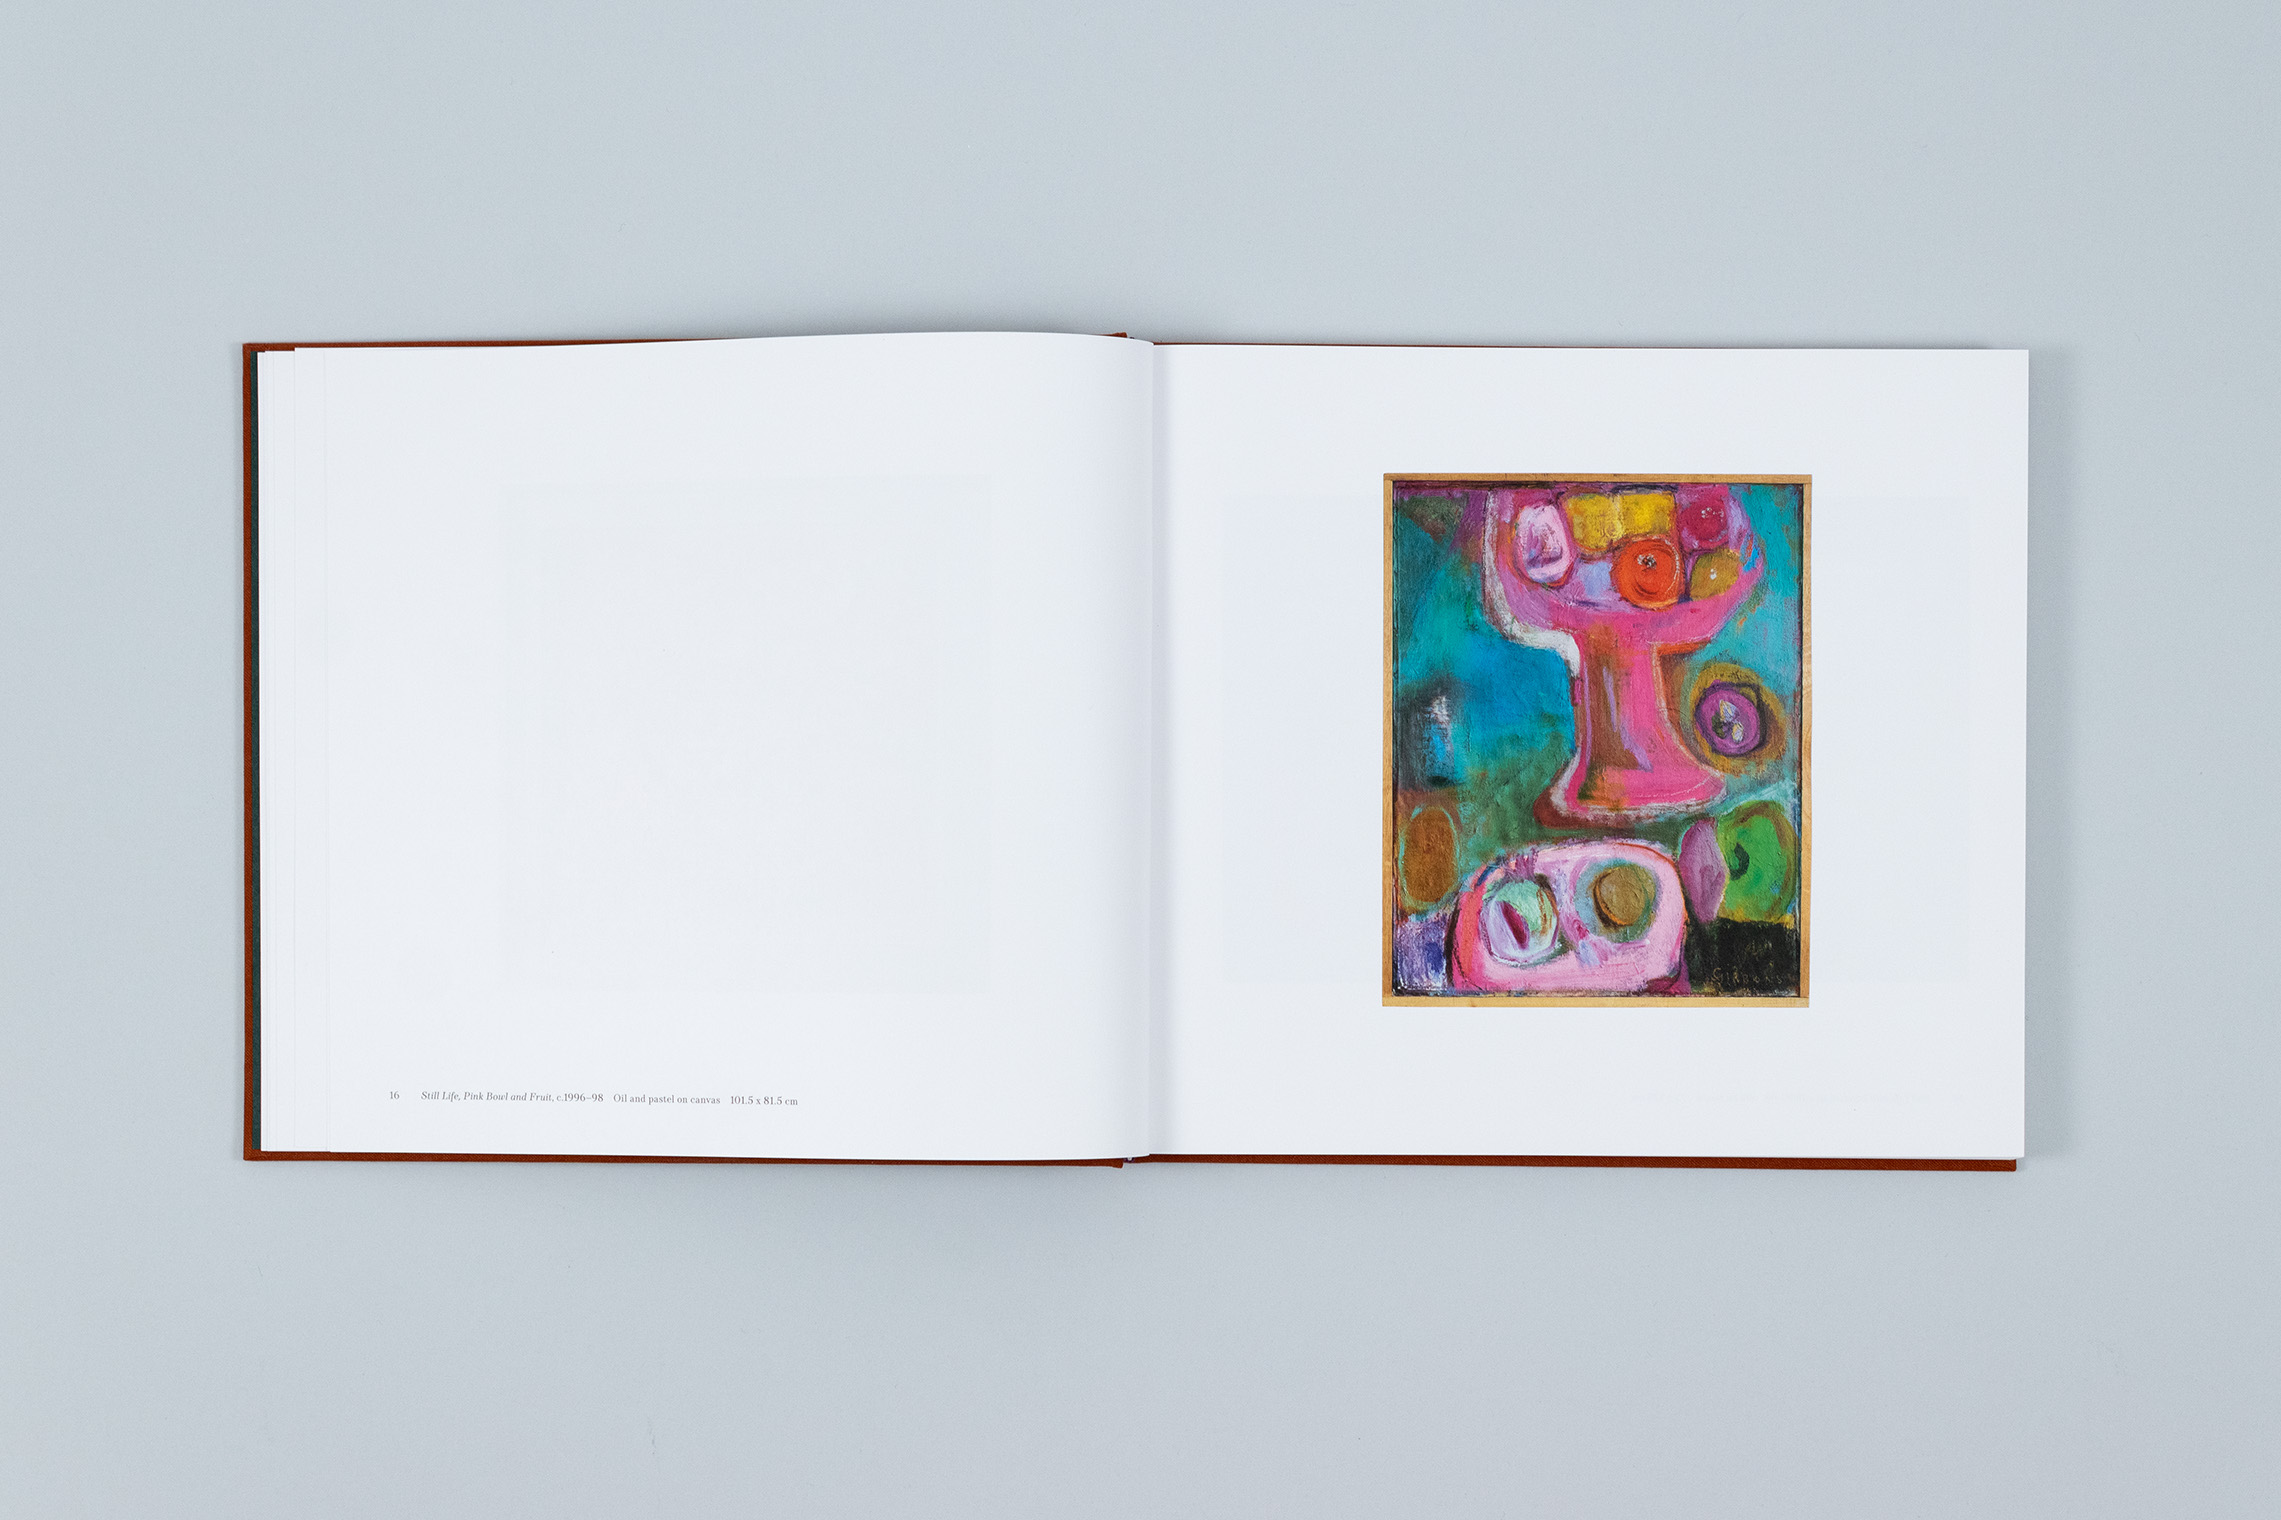 Carole Gibbons monograph spread showing a still life oil painting of fruit on the right page, in vibrant colours with a wooden frame